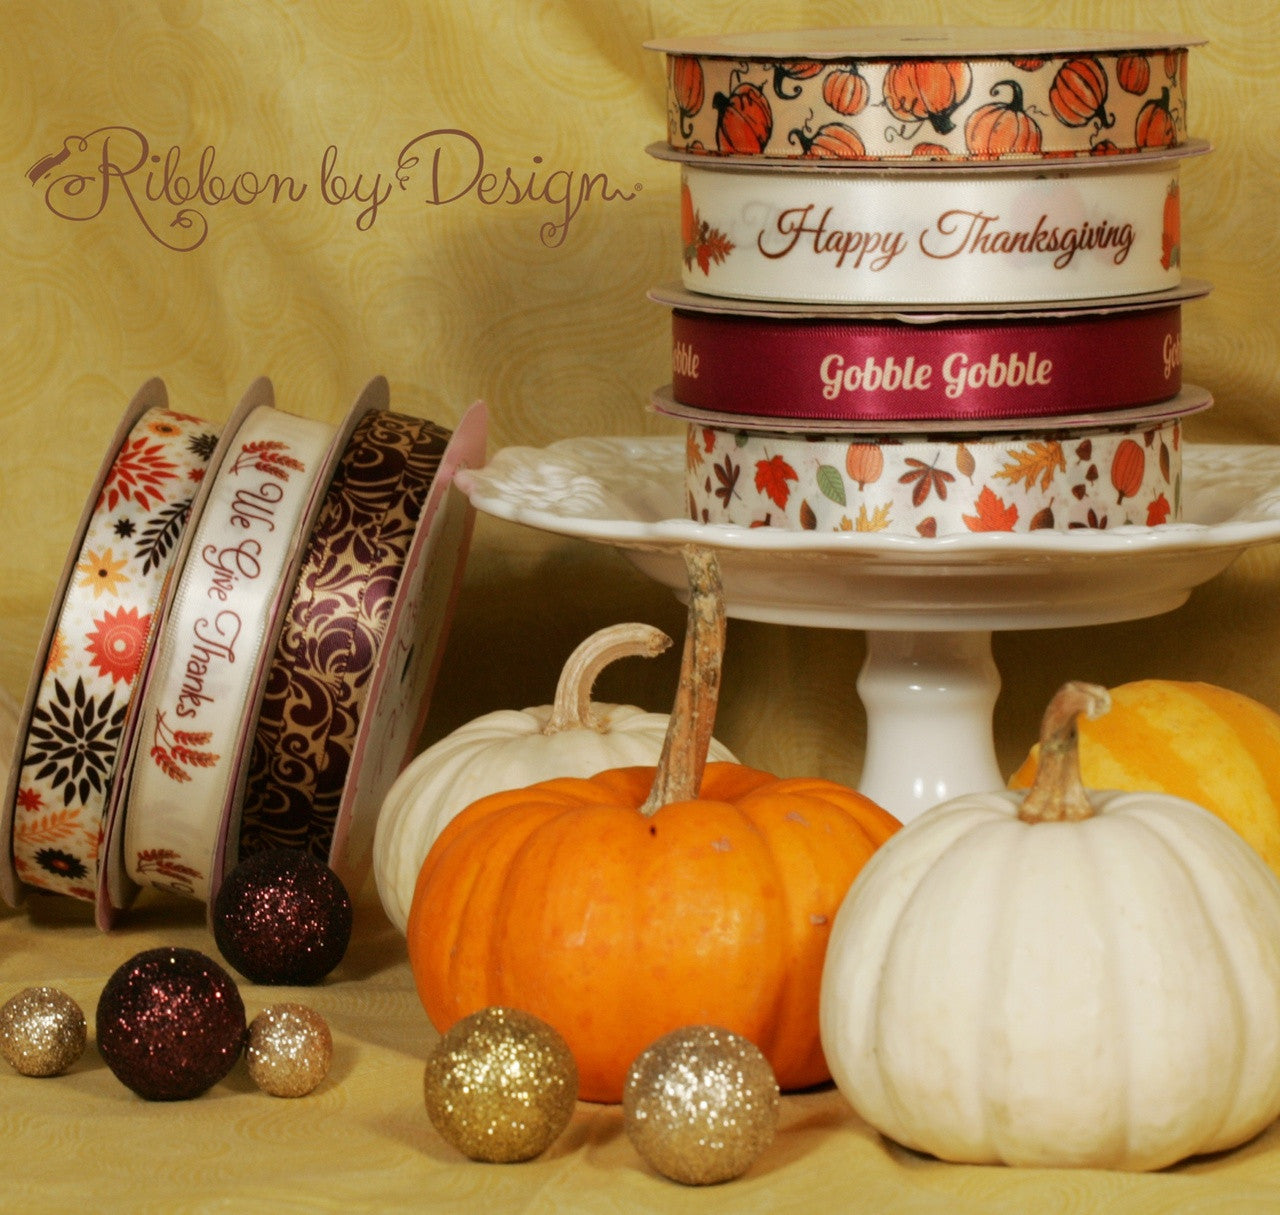 Our Fall Collection includes Happy Thanksgiving and We Give Thanks ribbons to make a beautiful vignette for your business or home.